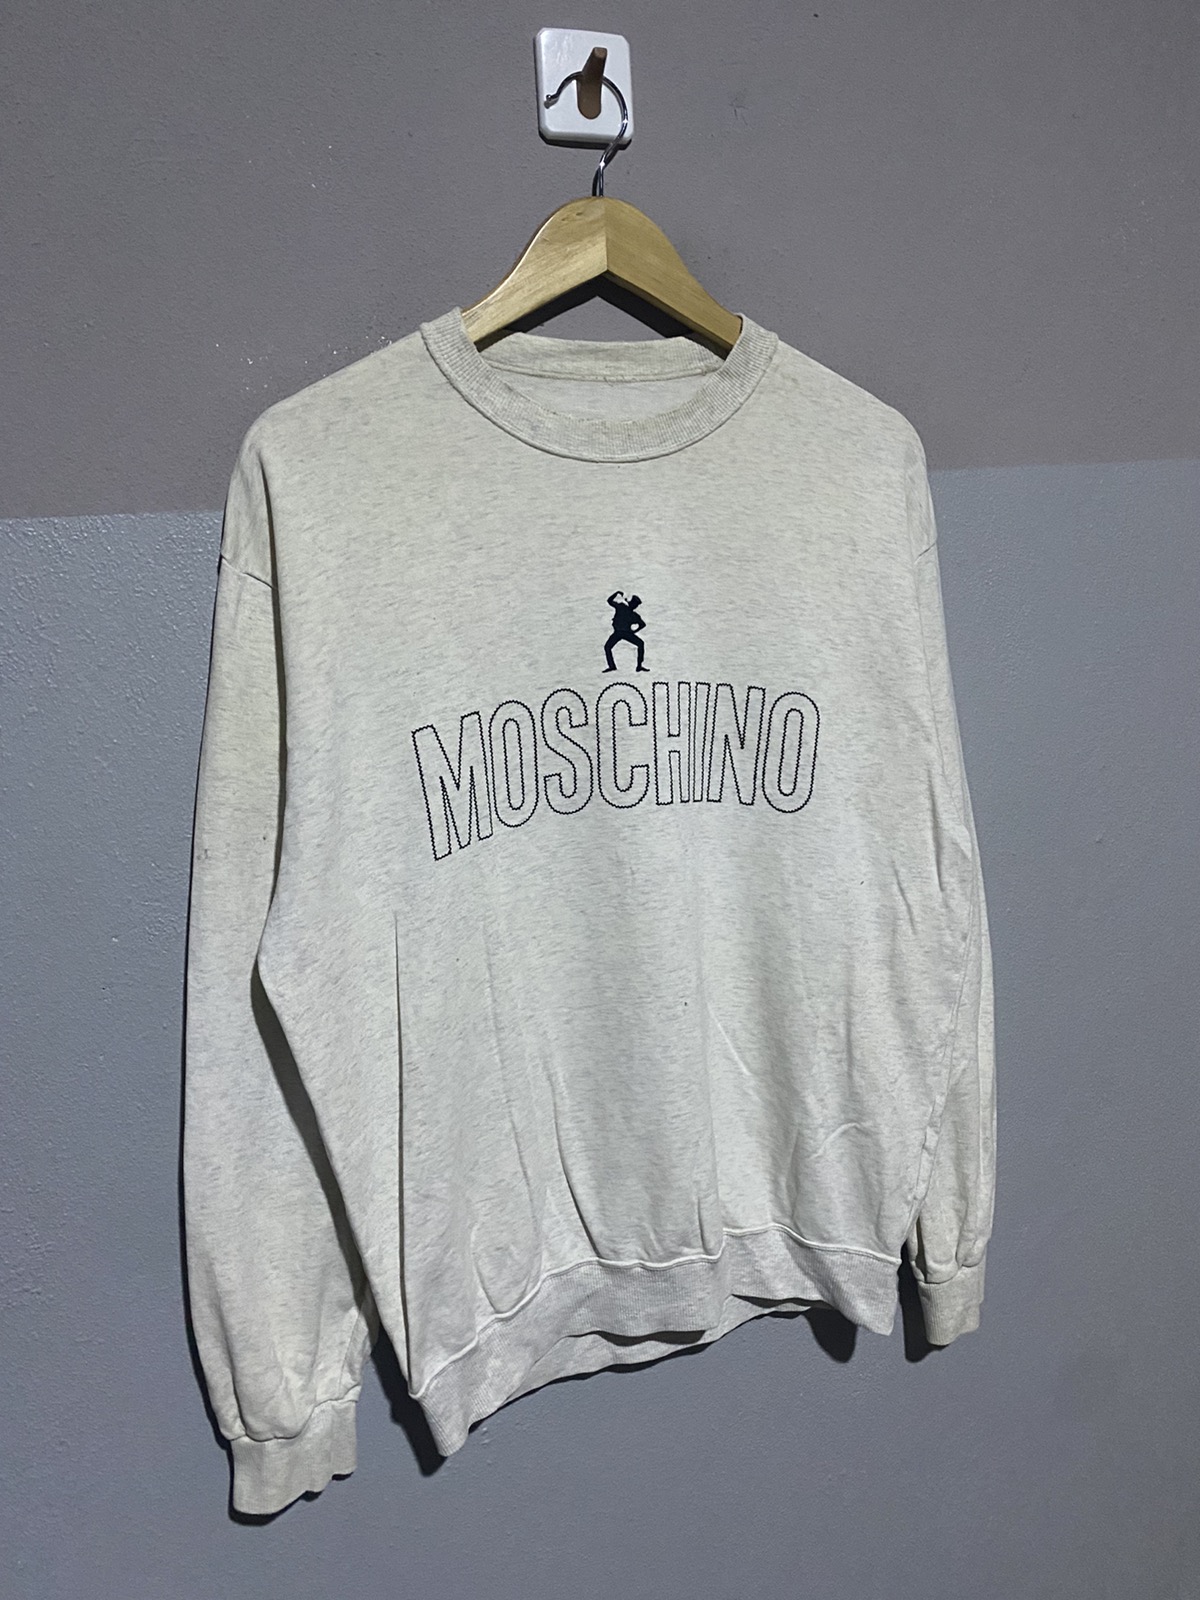 🔥SALE🔥MOSCHINO SWEATSHIRTS EMBROIDERED LOGOS MADE IN JAPAN - 3